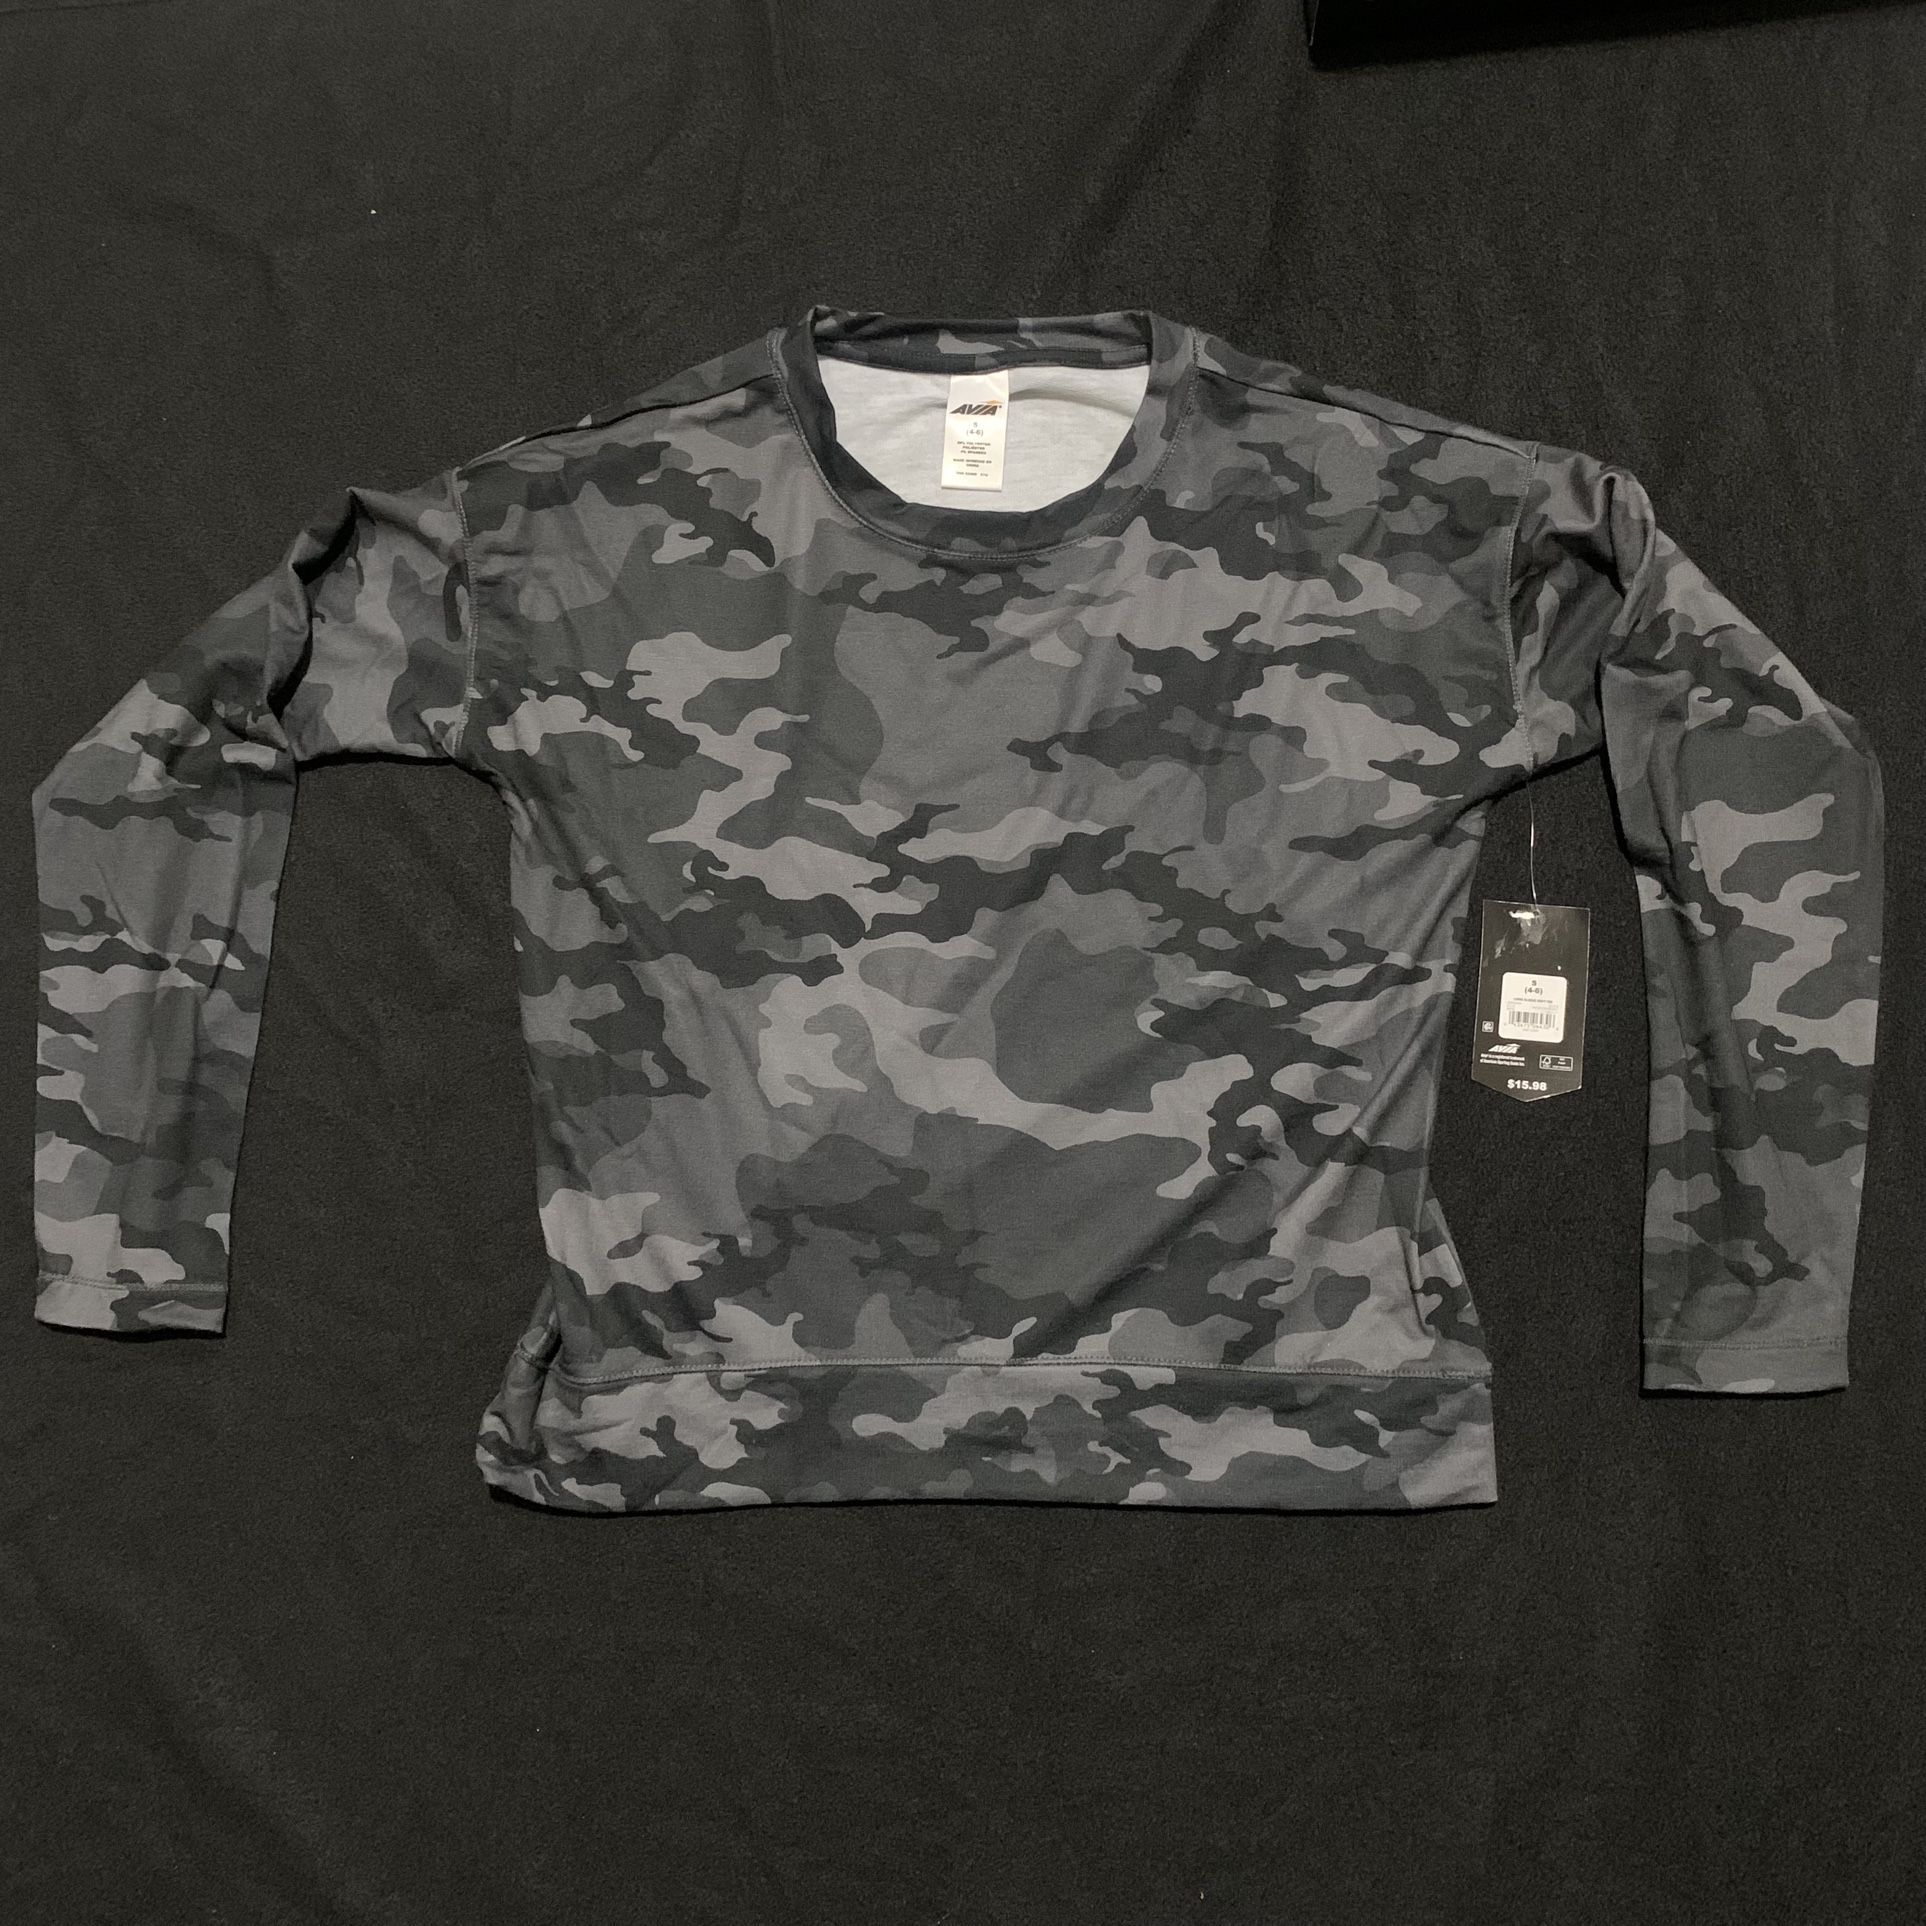 Avia Black Camo Workout Running Exercise Women’s Long Sleeve Size Small 4-6 Brand New With Tags 